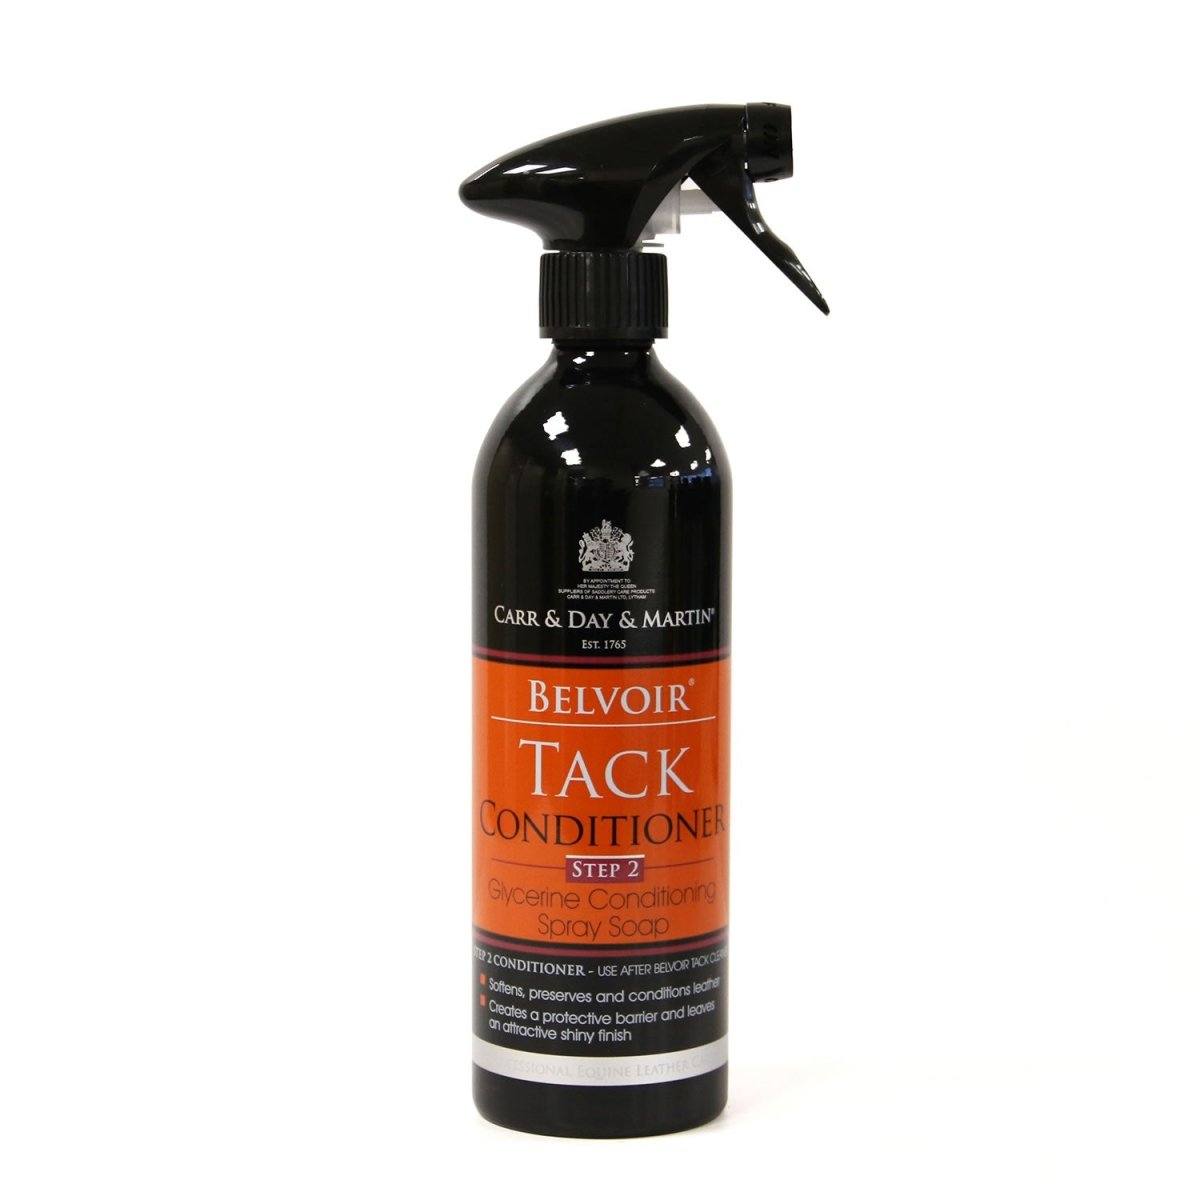 Carr & Day & Martin Belvoir Tack Conditioner Step 2 - 500Ml -